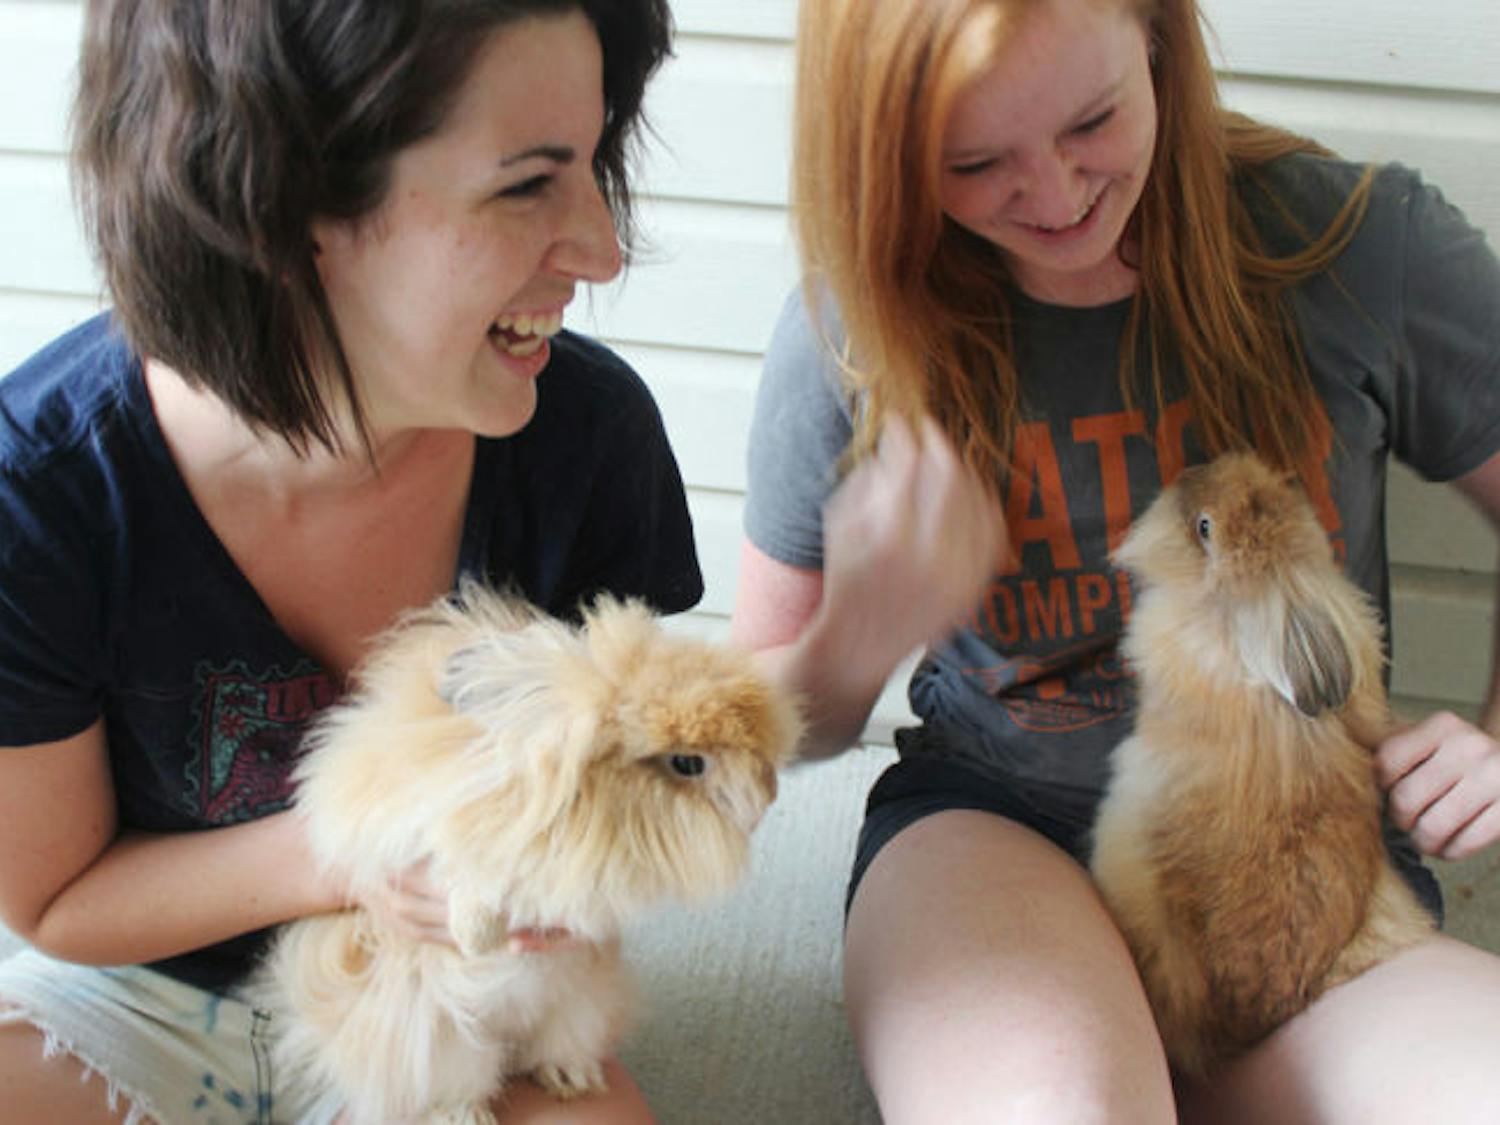 Psychology sophomore Stephanie Jelnicky, 19, and biological engineering sophomore Mary Regan, 18, hold bunnies Dory and Julie, who they fostered through the Gainesville Rabbit Rescue.
&nbsp;